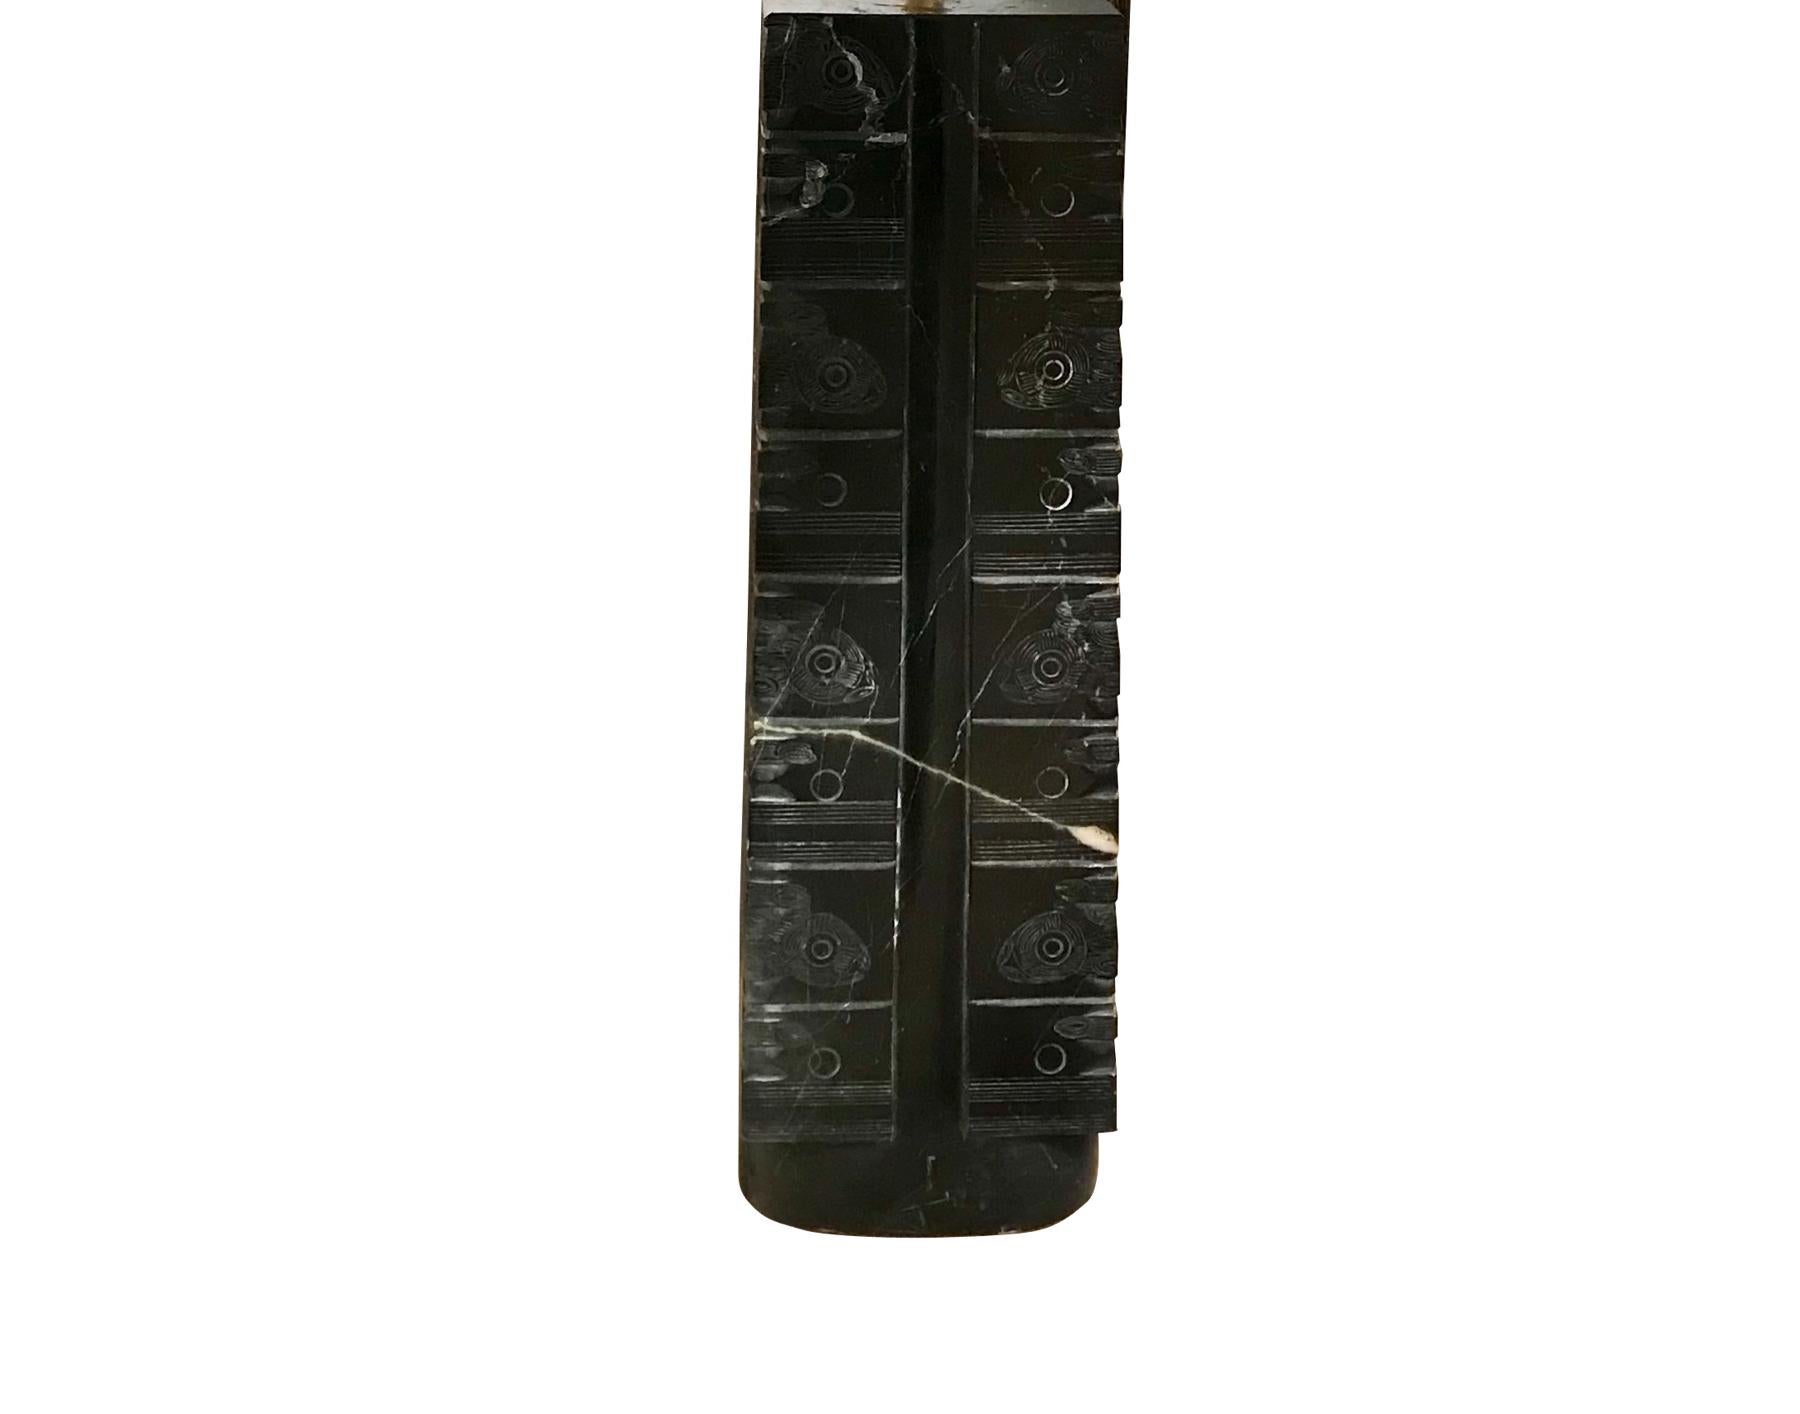 Pair of Chinese black polished stone with engraved symbols of the earth and the universe.
Multi-tiered design.
Newly rewired.
New black Belgian linen shades
Overall height 24